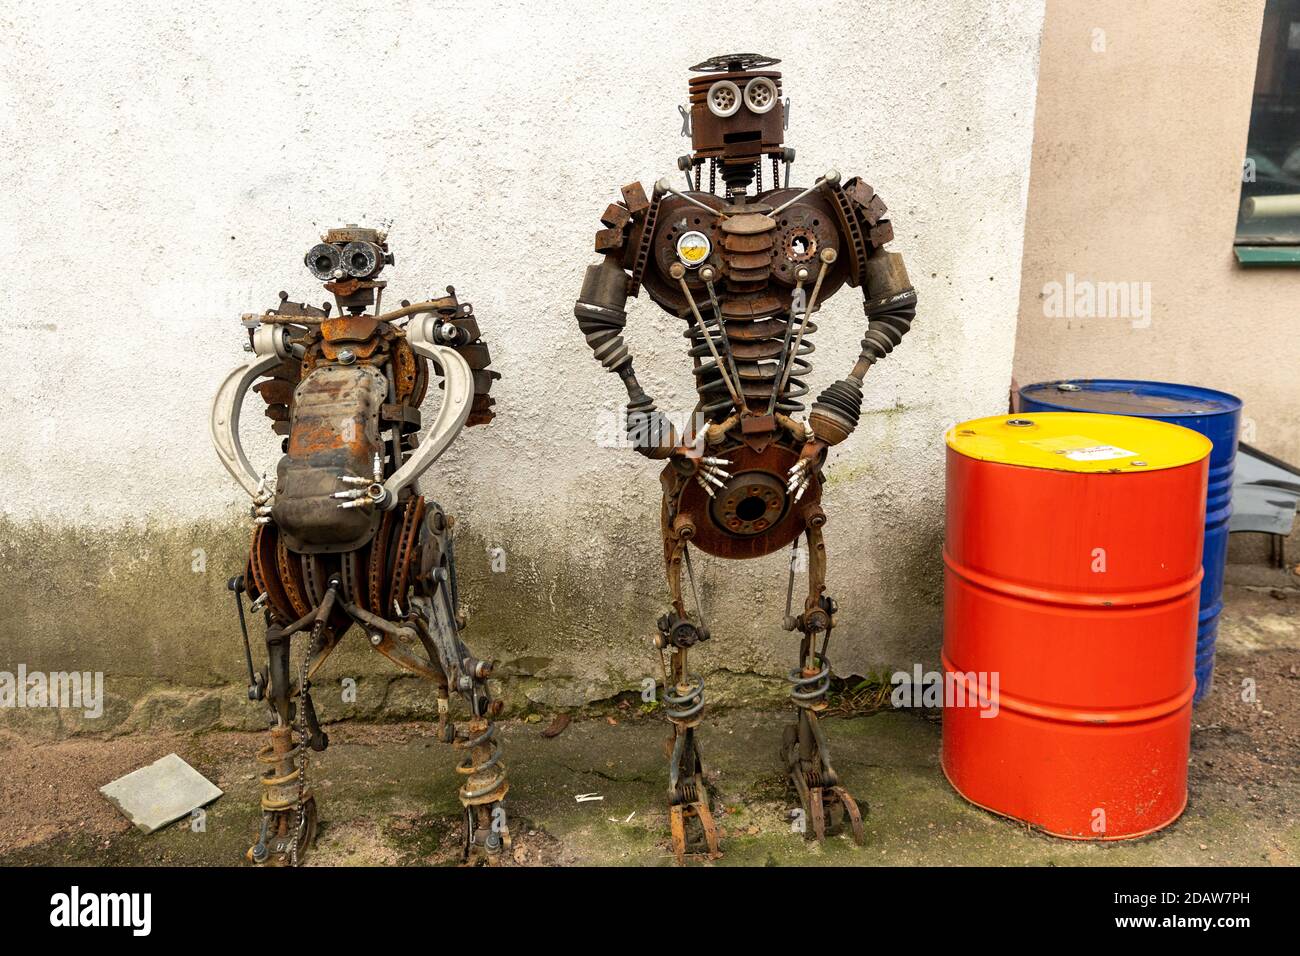 Russia. Vyborg. 10.10.2020 Statue of a robot assembled from auto parts Stock Photo